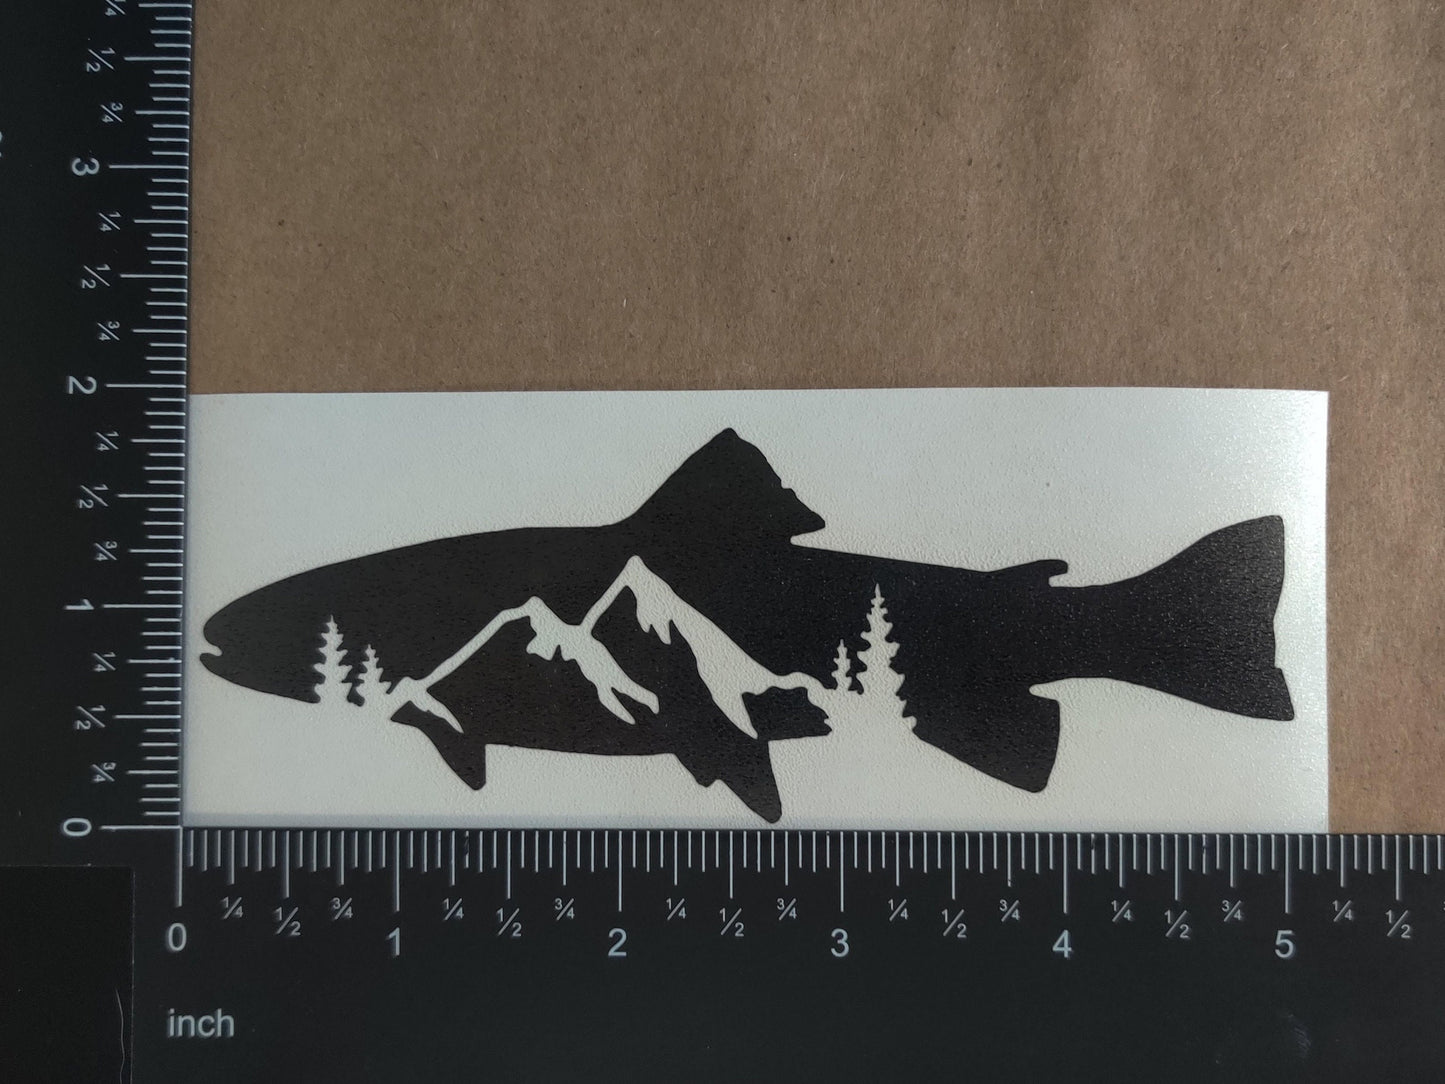 Trout Fishing Decal 4 Pack